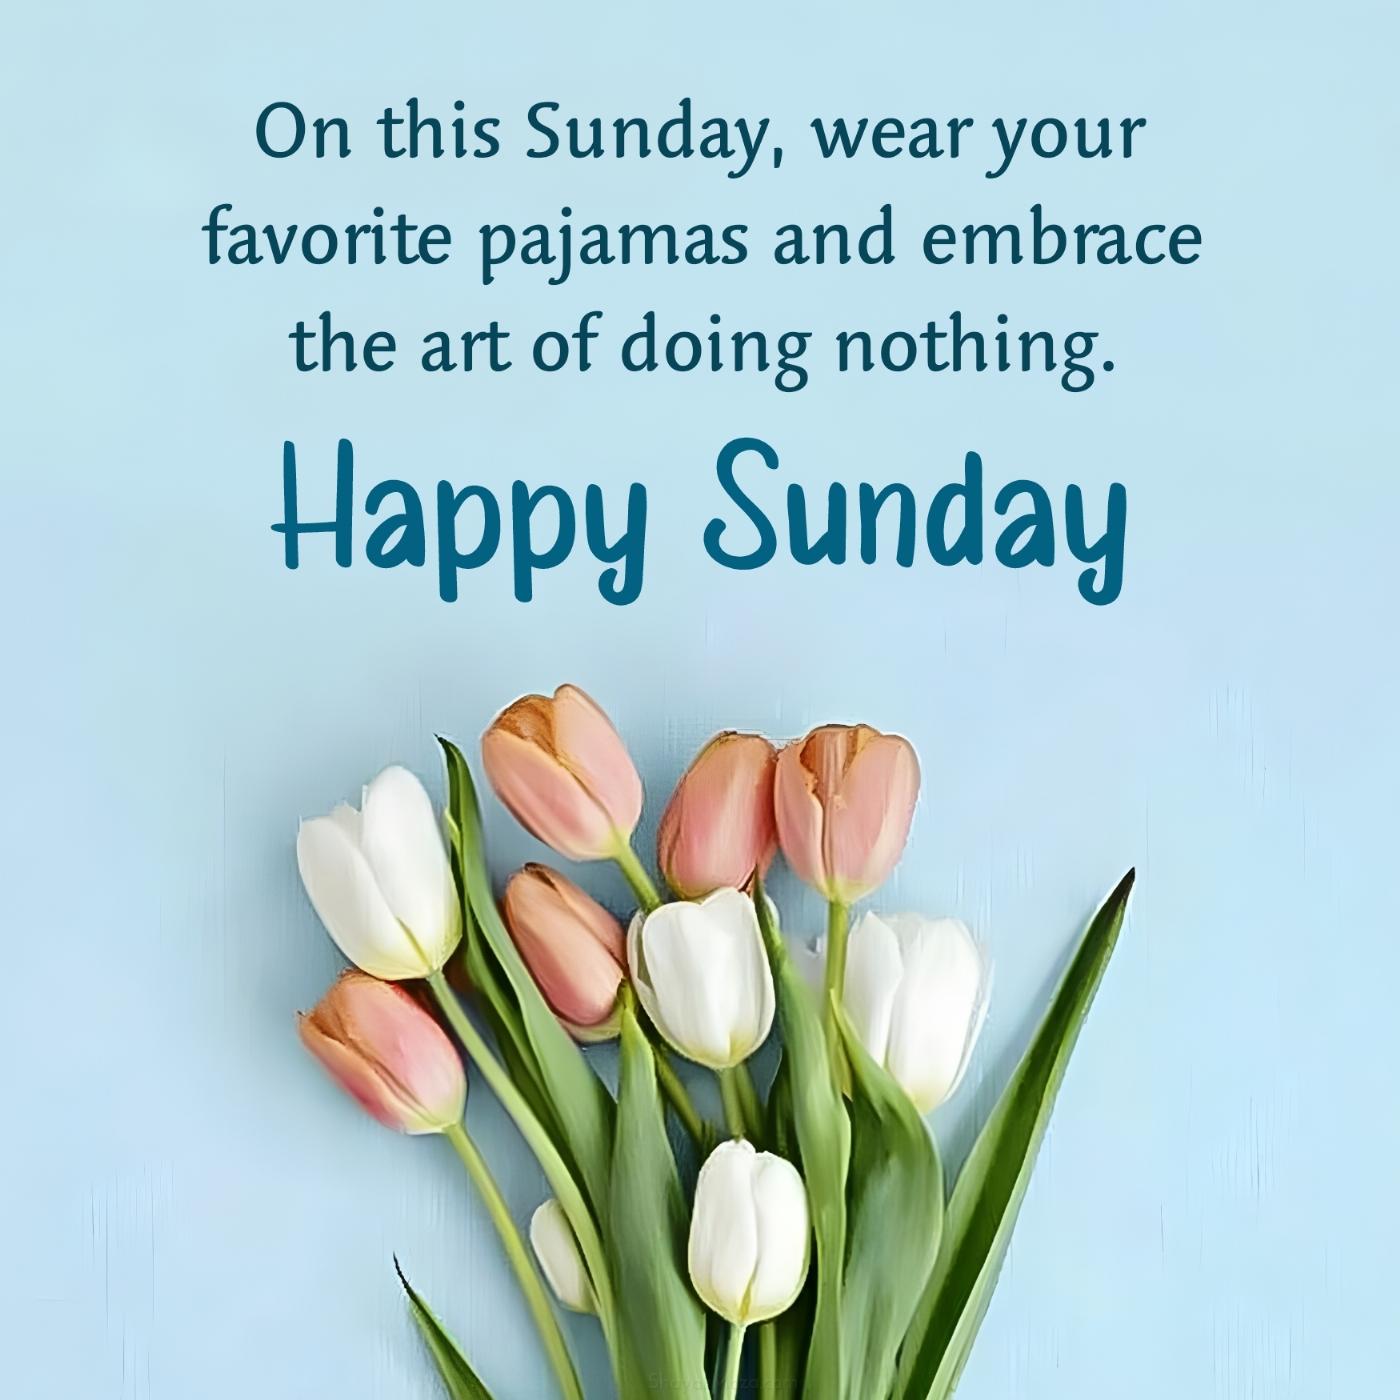 On this Sunday wear your favorite pajamas and embrace the art